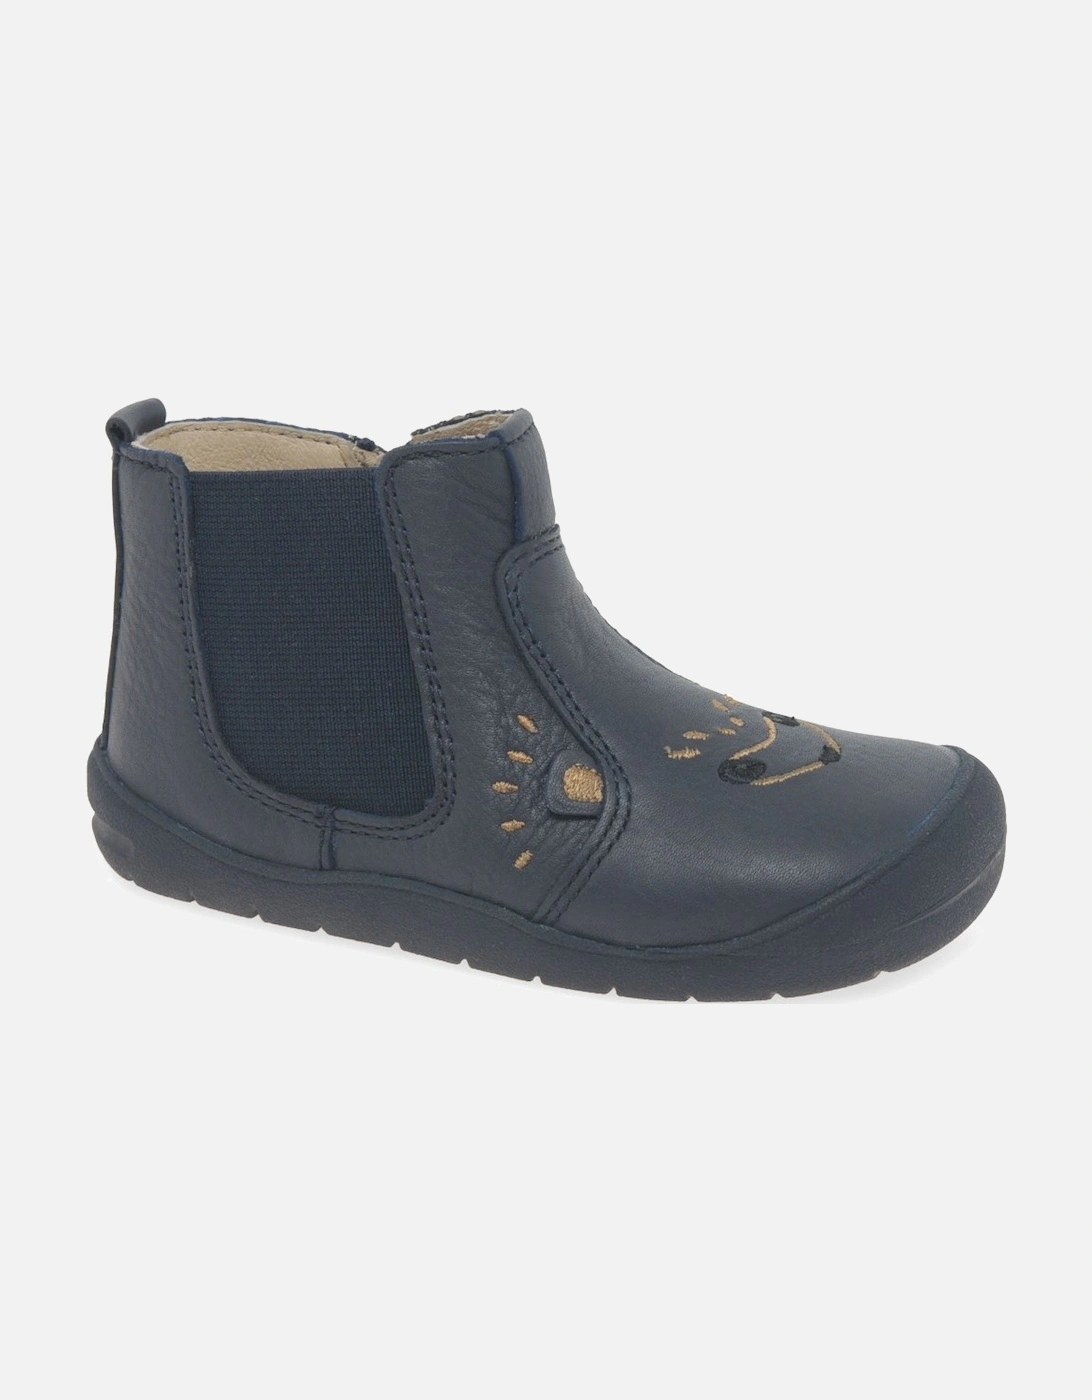 Rustle Boys Infant Boots, 8 of 7